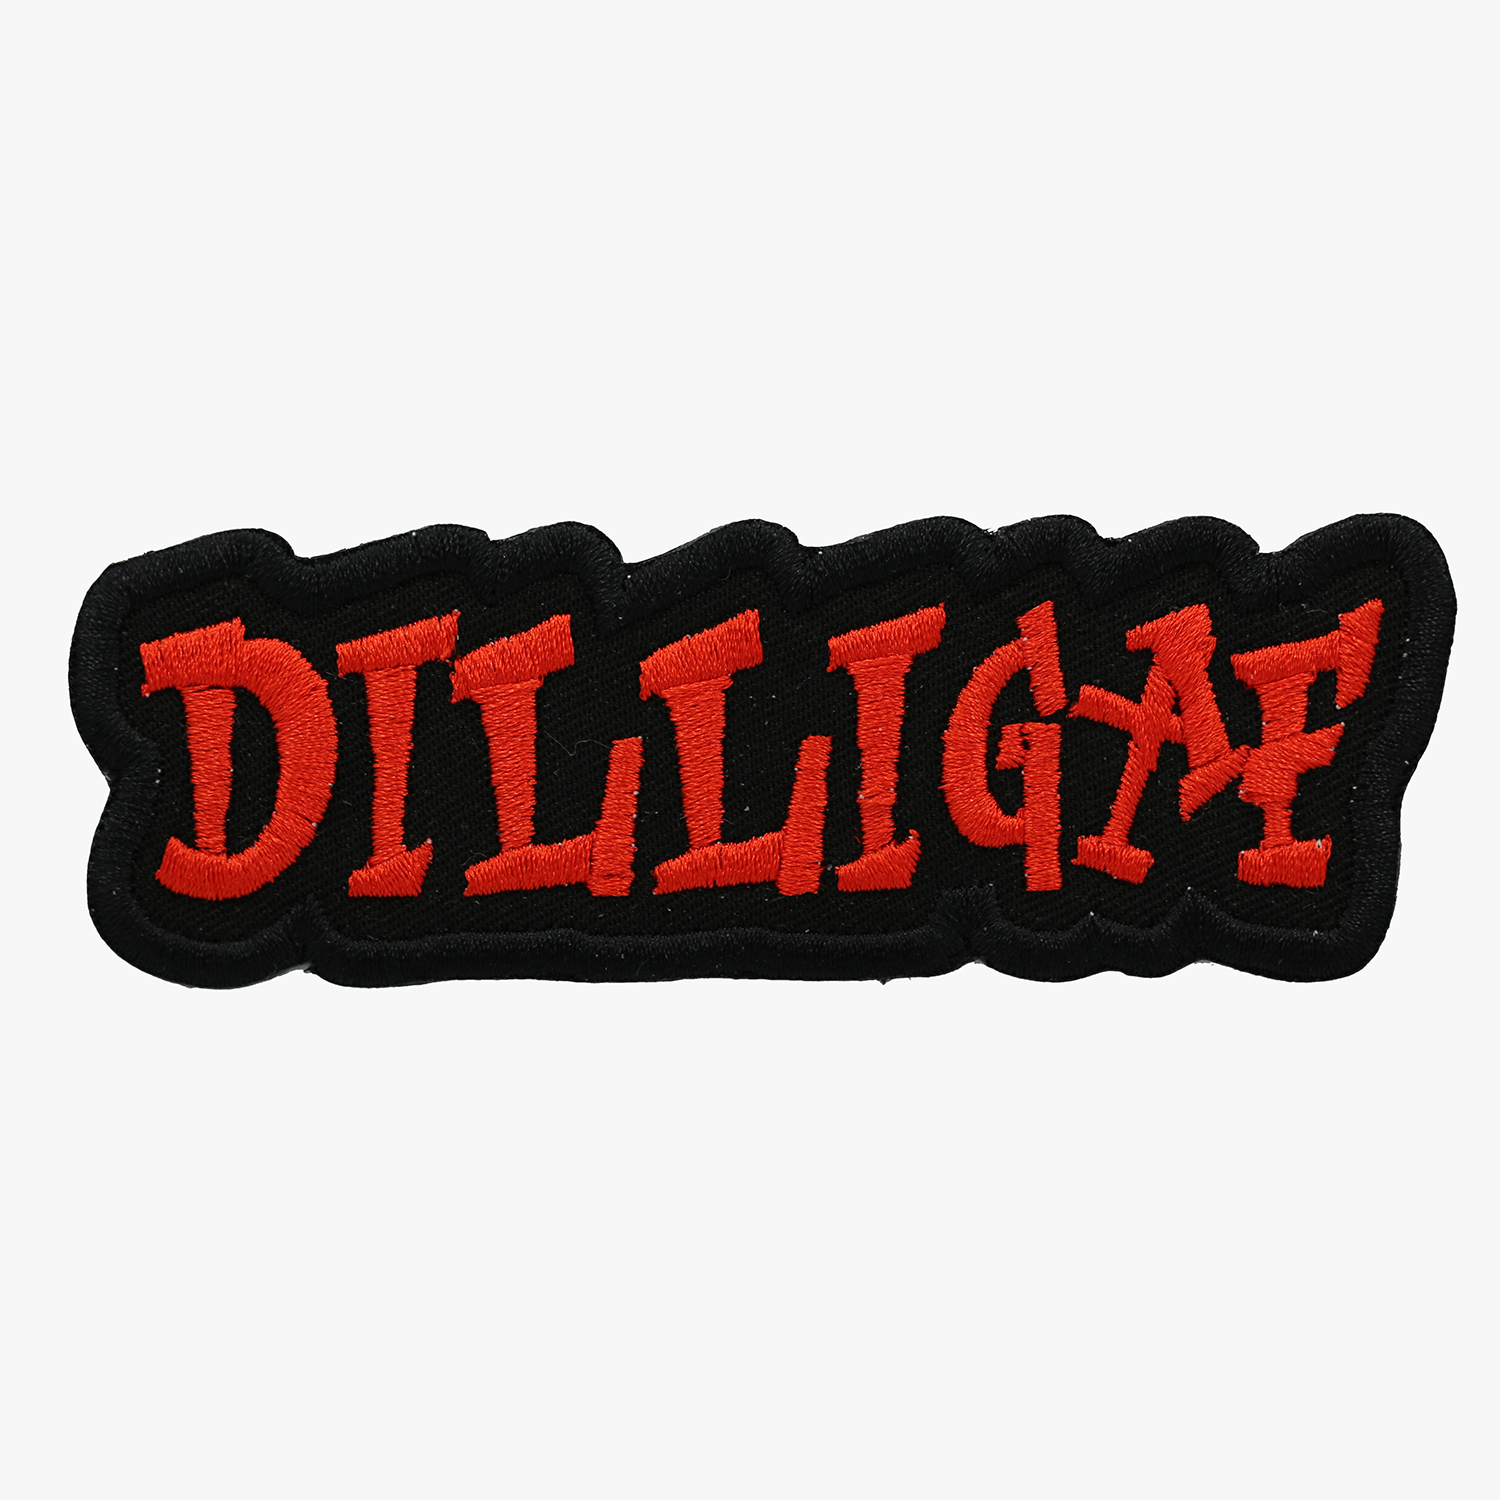 DILLIGAF Patch Motorcycle Club Rank Officer Reflective Patches for Vest Night Vi